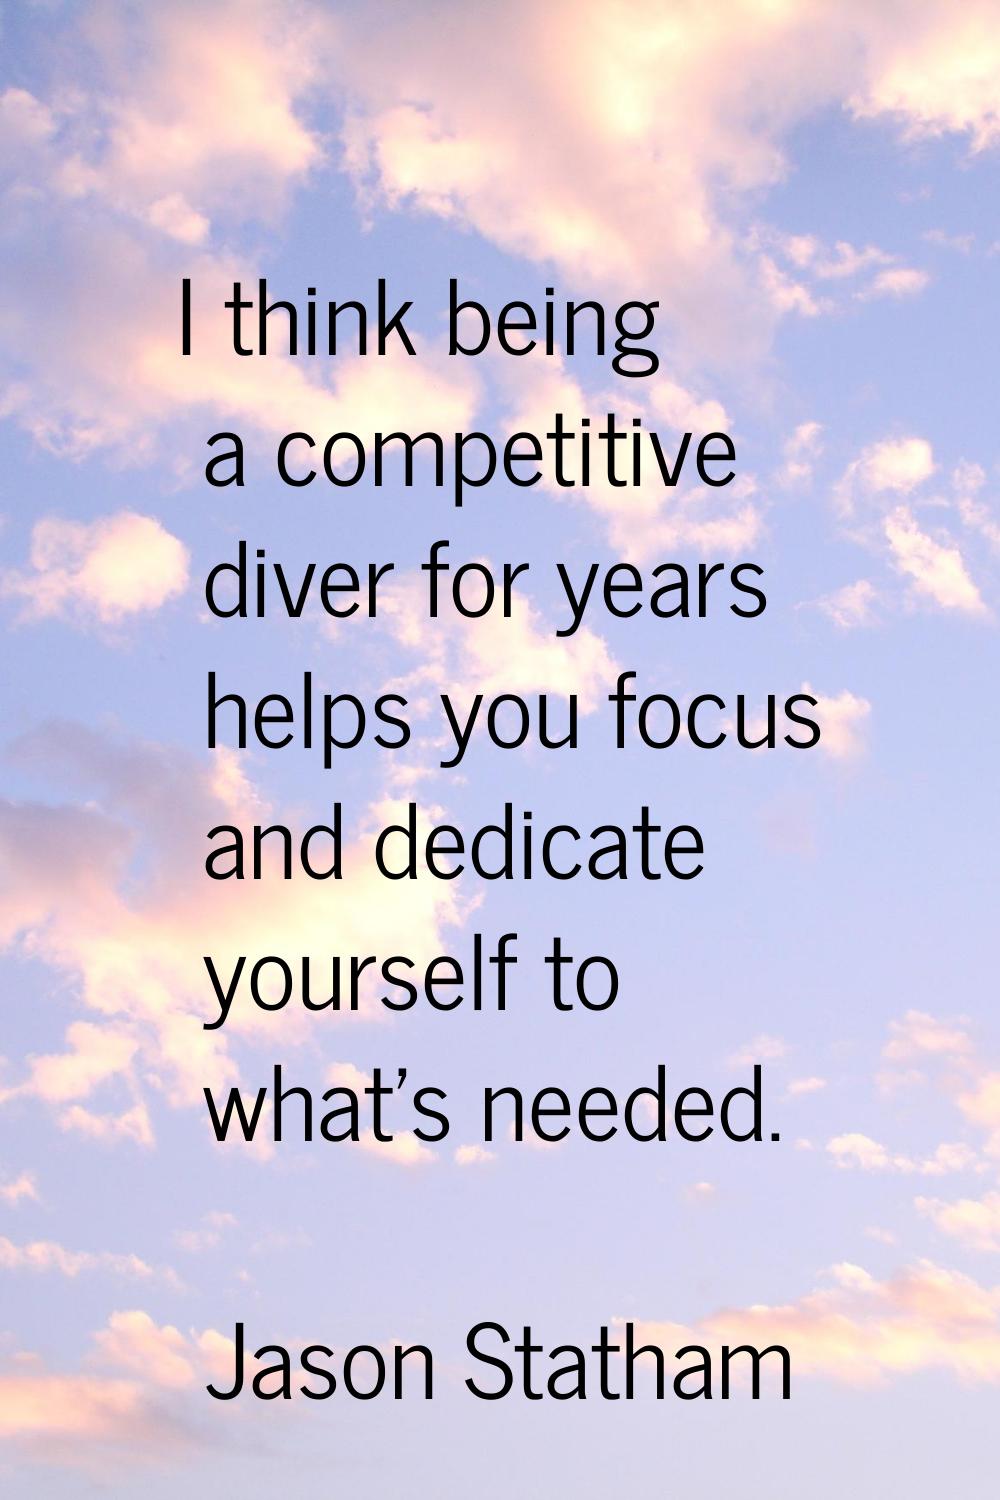 I think being a competitive diver for years helps you focus and dedicate yourself to what's needed.